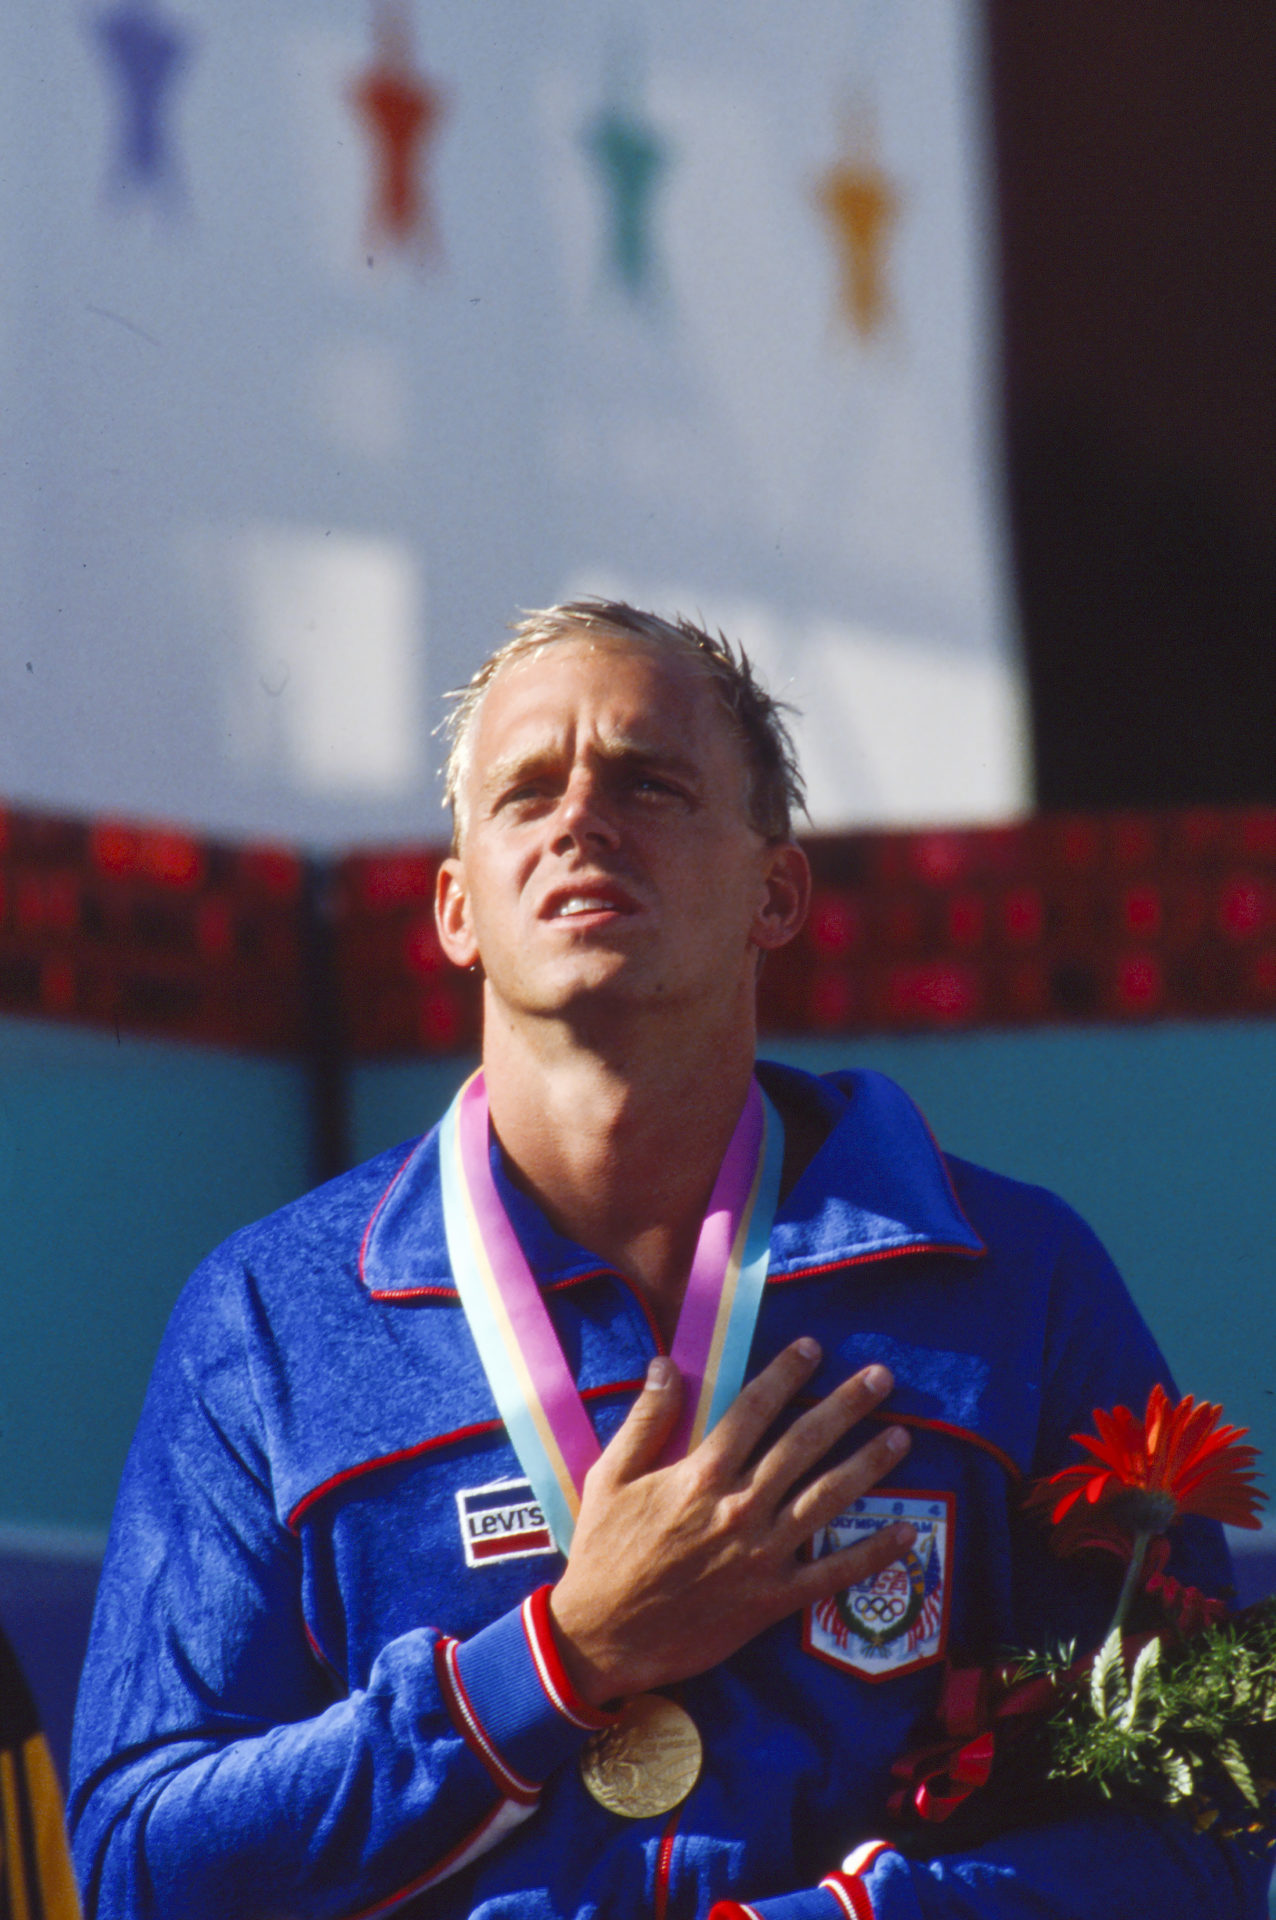 Men's Swimming 100 Metre Freestyle Medal Ceremony At The 1984 Summer Olympics